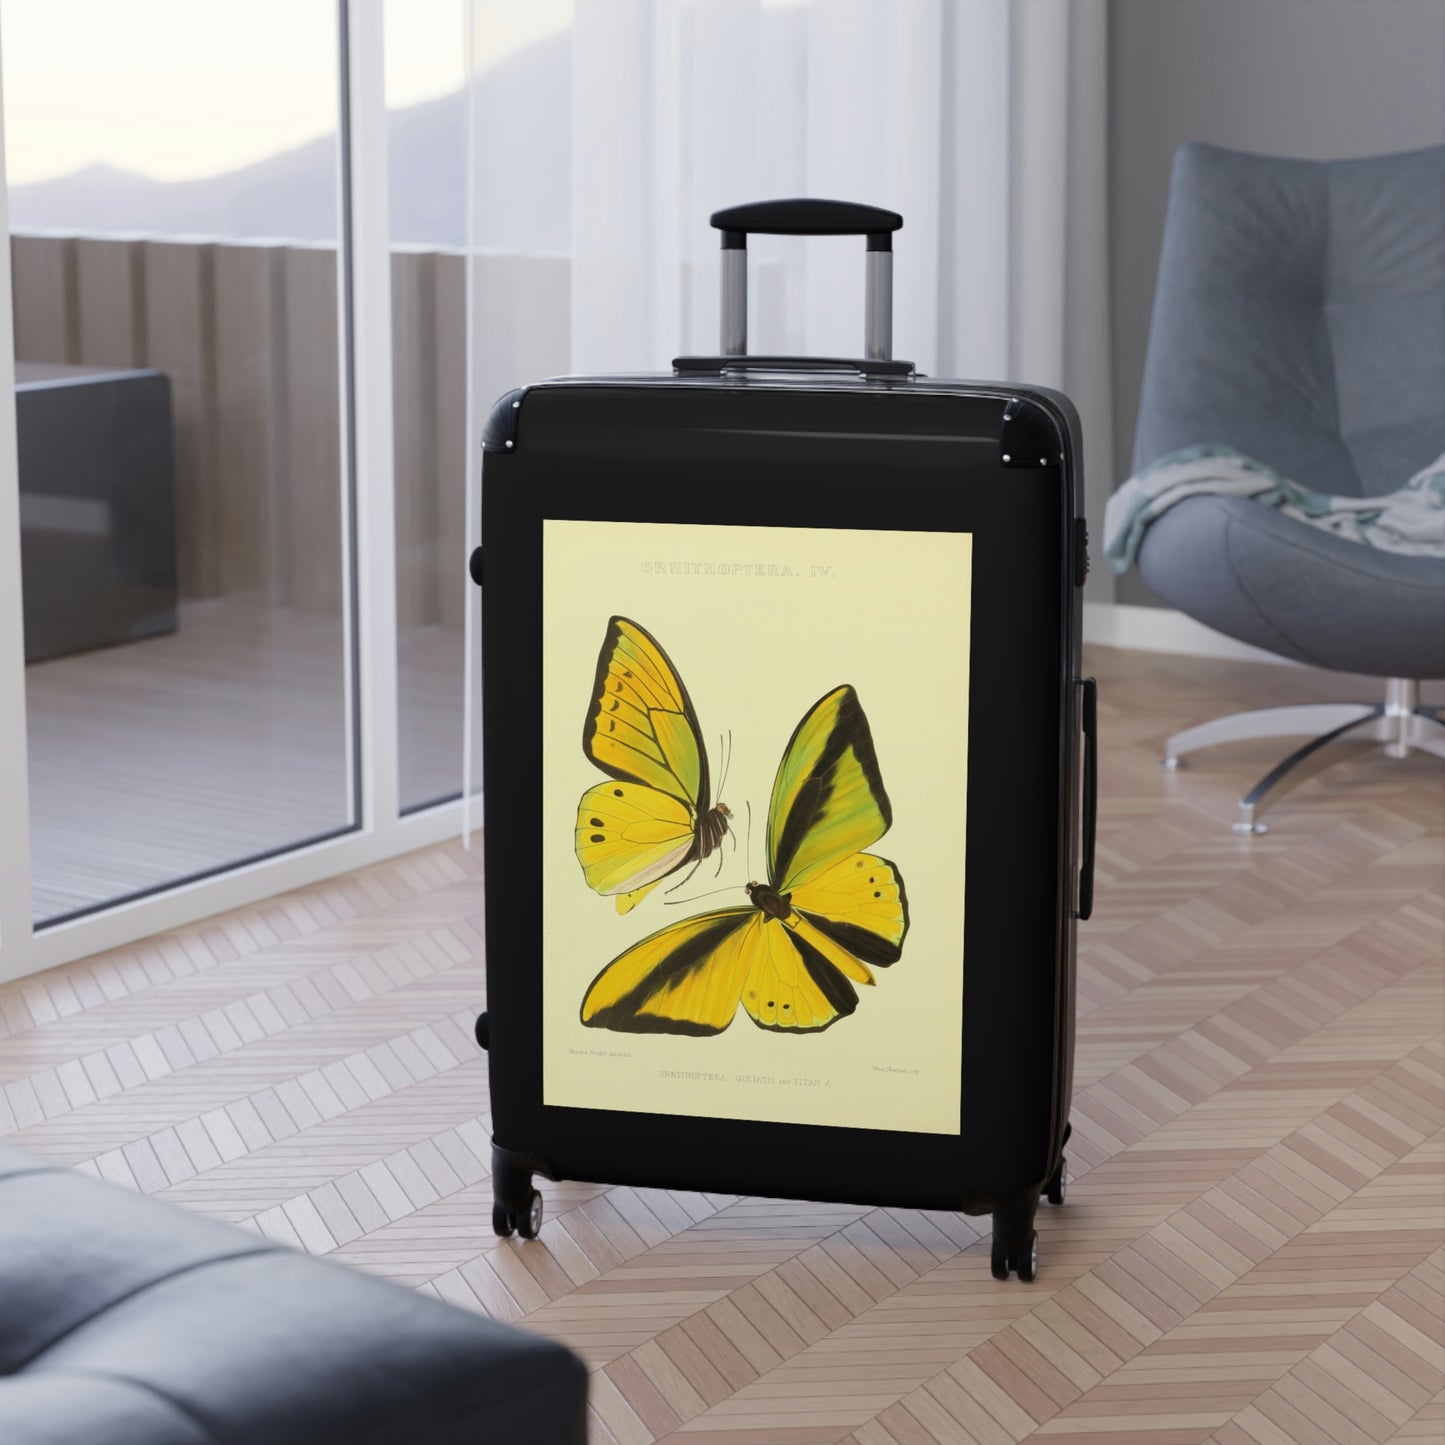 Getrott Yellow Butterfly Ornithoptera Goliath var Titan Black Cabin Suitcase Extended Storage Adjustable Telescopic Handle Double wheeled Polycarbonate Hard-shell Built-in Lock-Bags-Geotrott